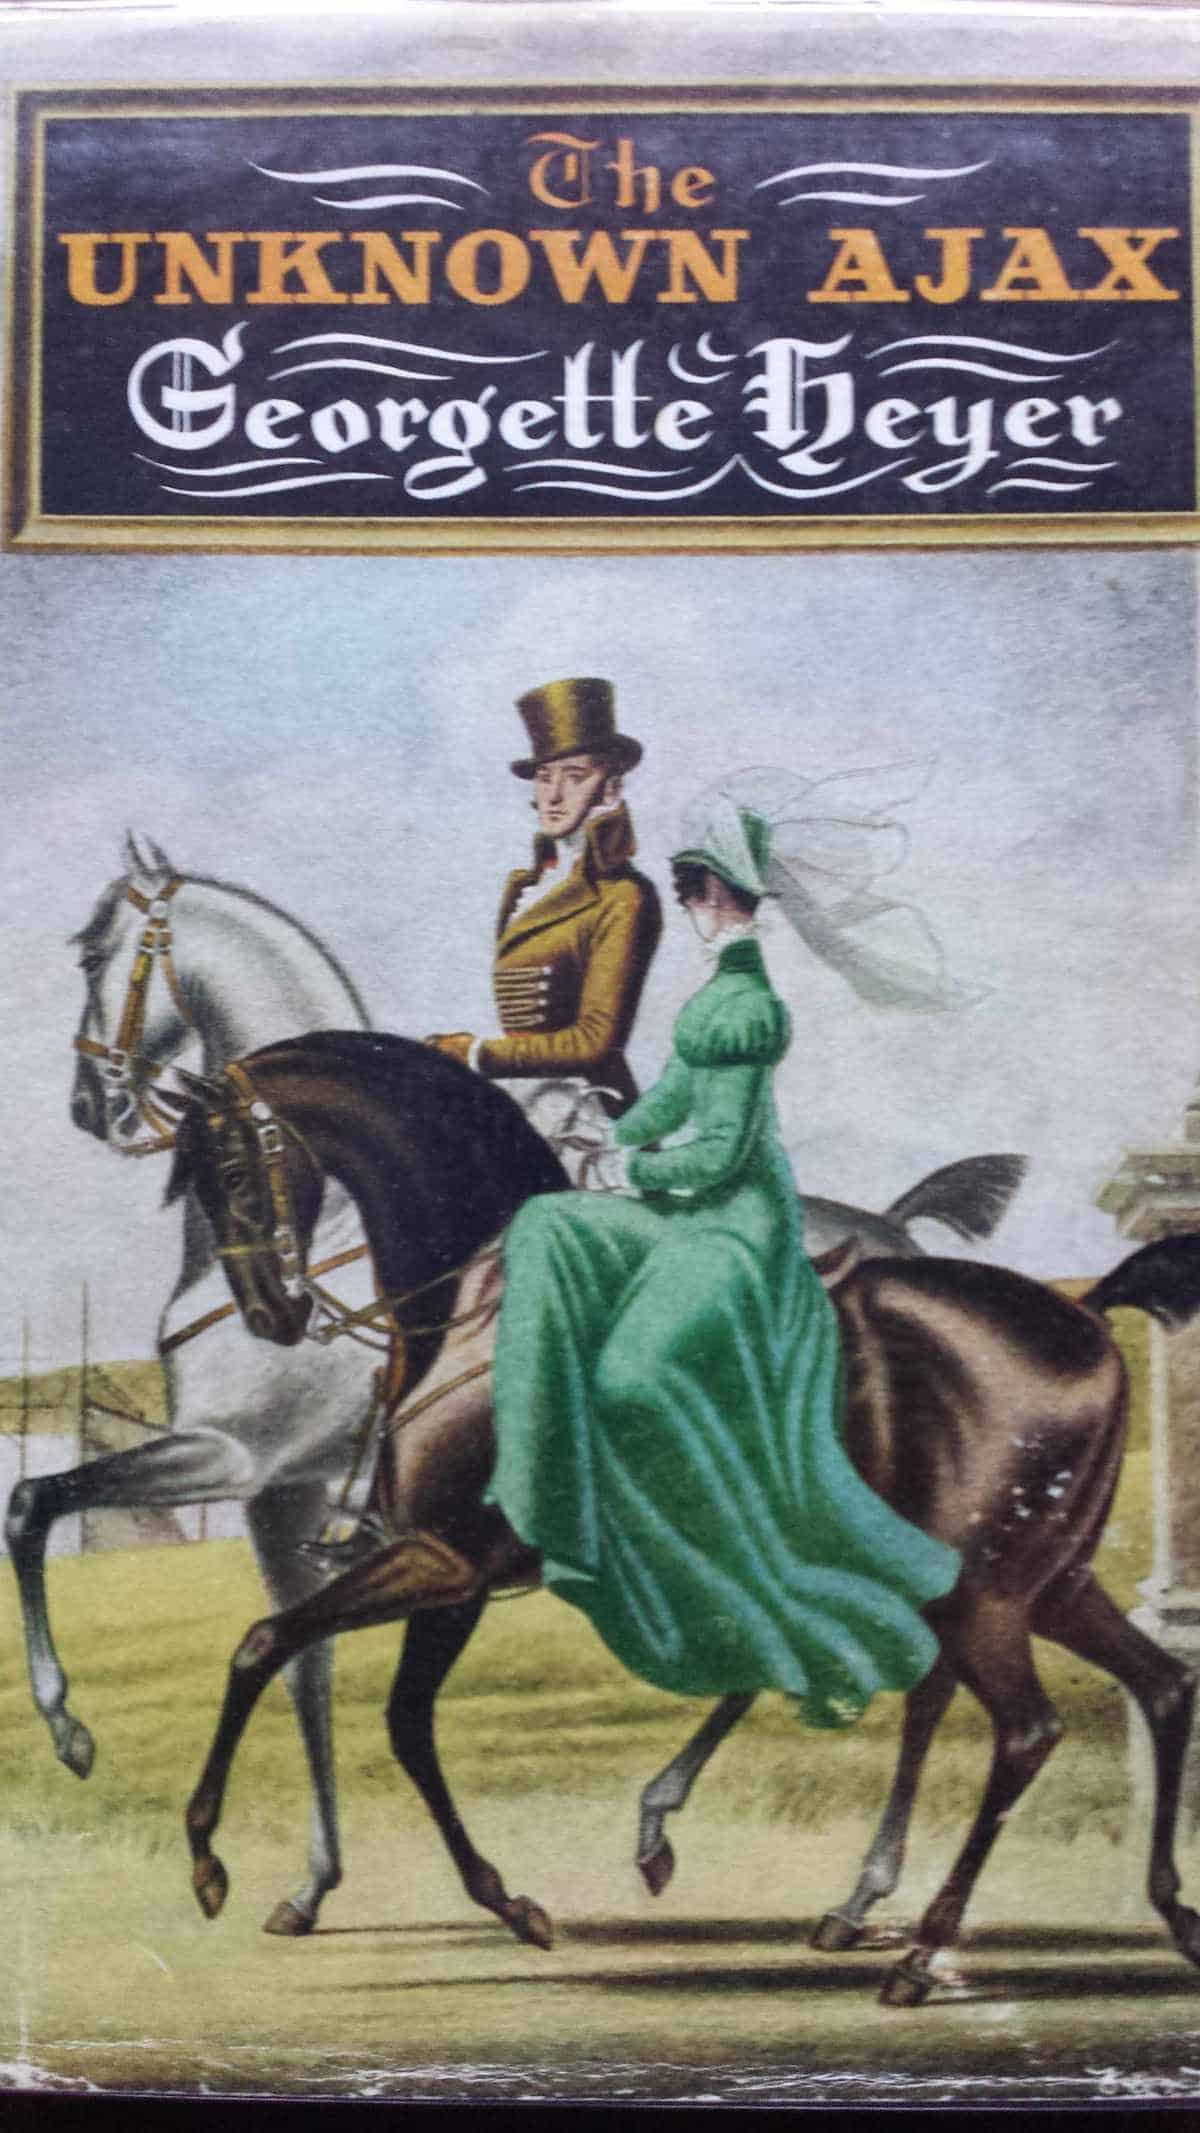 The Unknown Ajax - one of Heyer's funniest novels